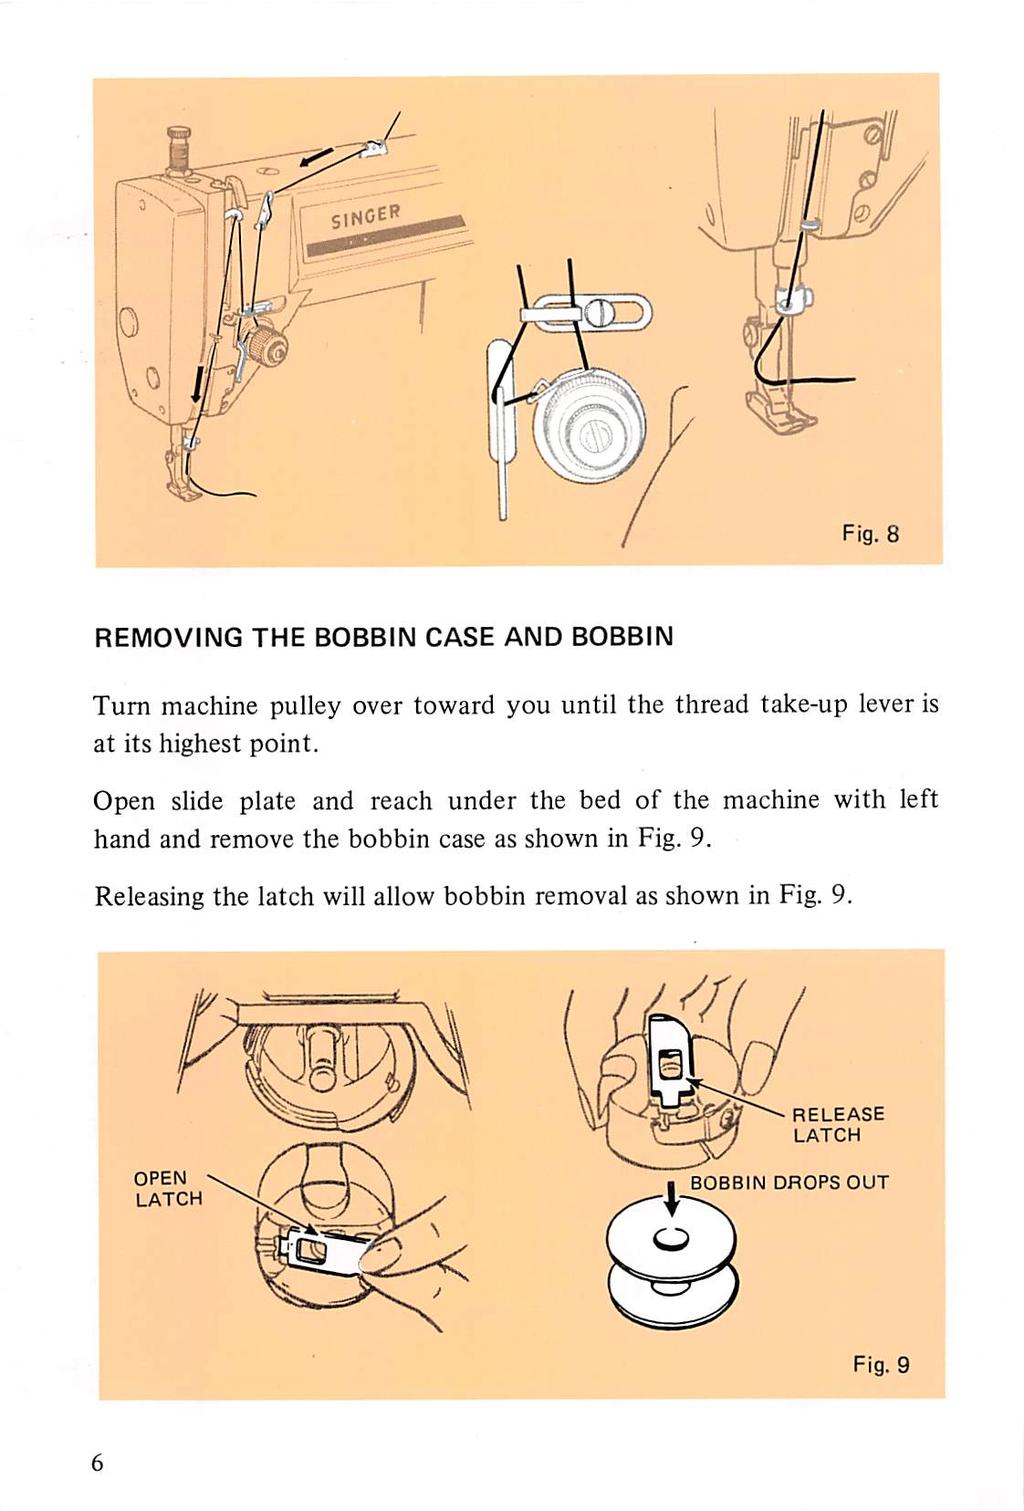 0 OD) REMOVING THE BOBBIN CASE AND BOBBIN Turn machine pulley over toward you until the thread take-up lever is at its highest point.